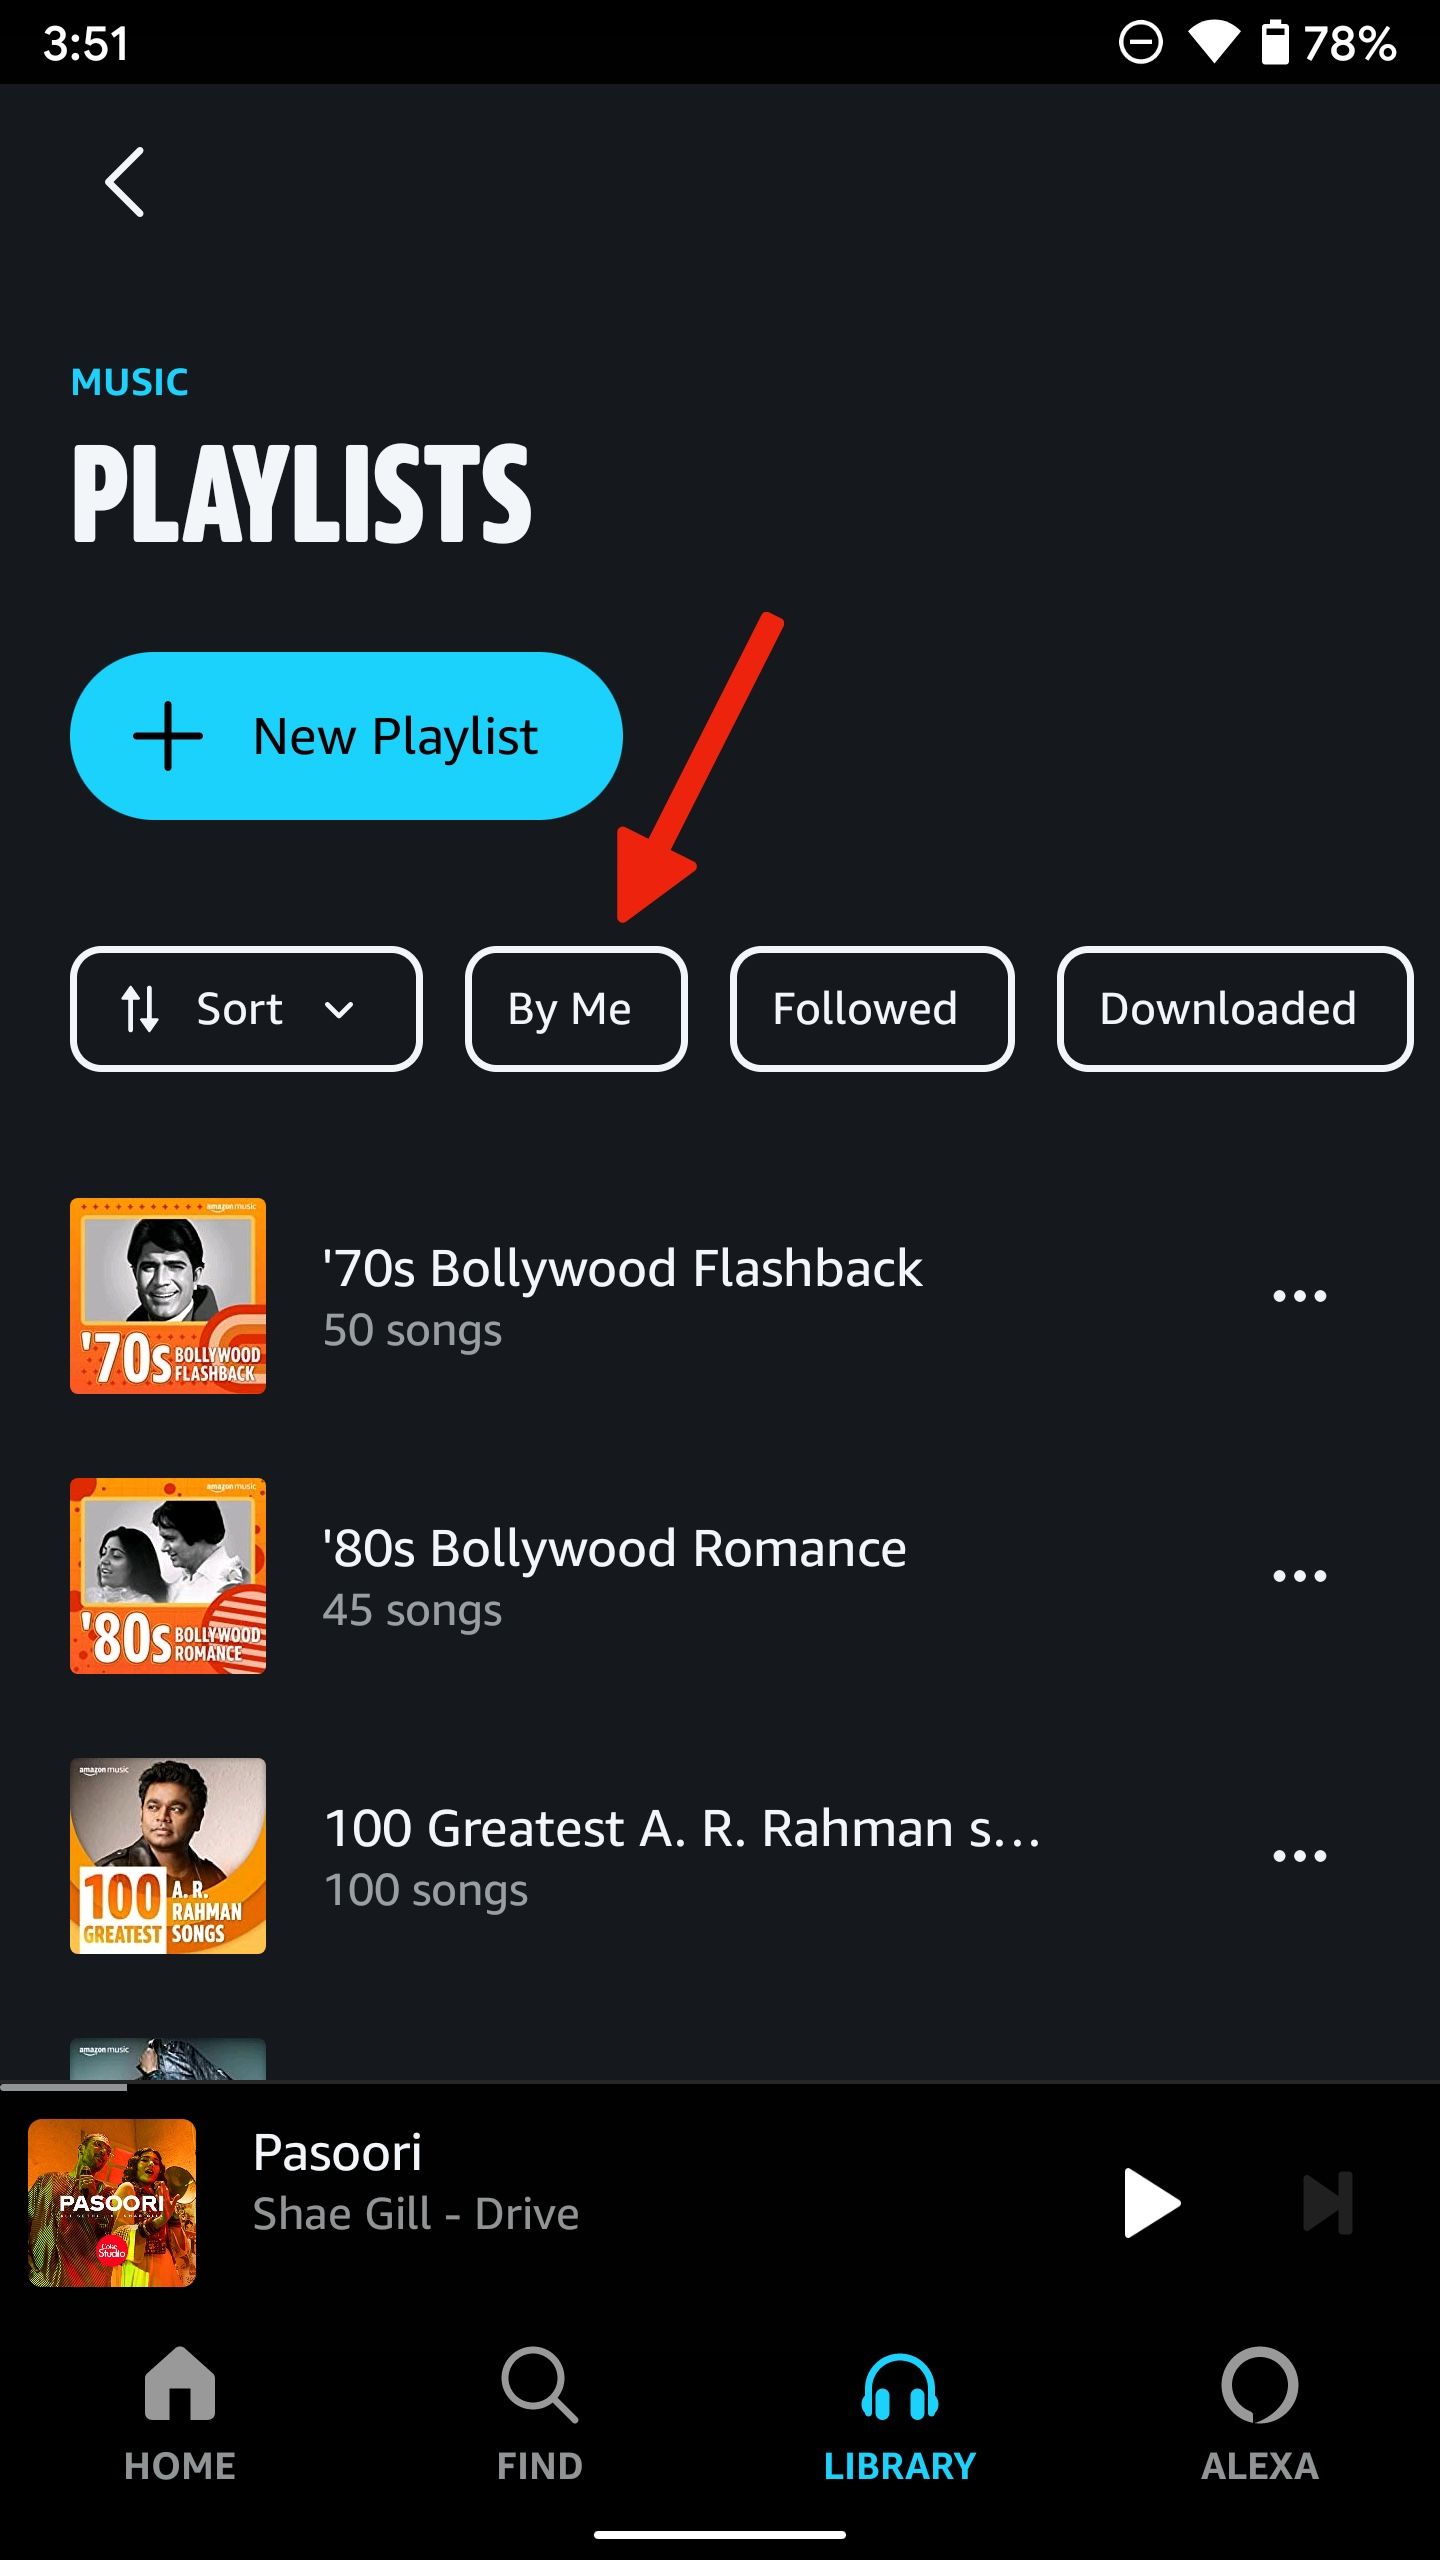 Playlists page in the Amazon Music app with an arrow pointing to 'By Me'.